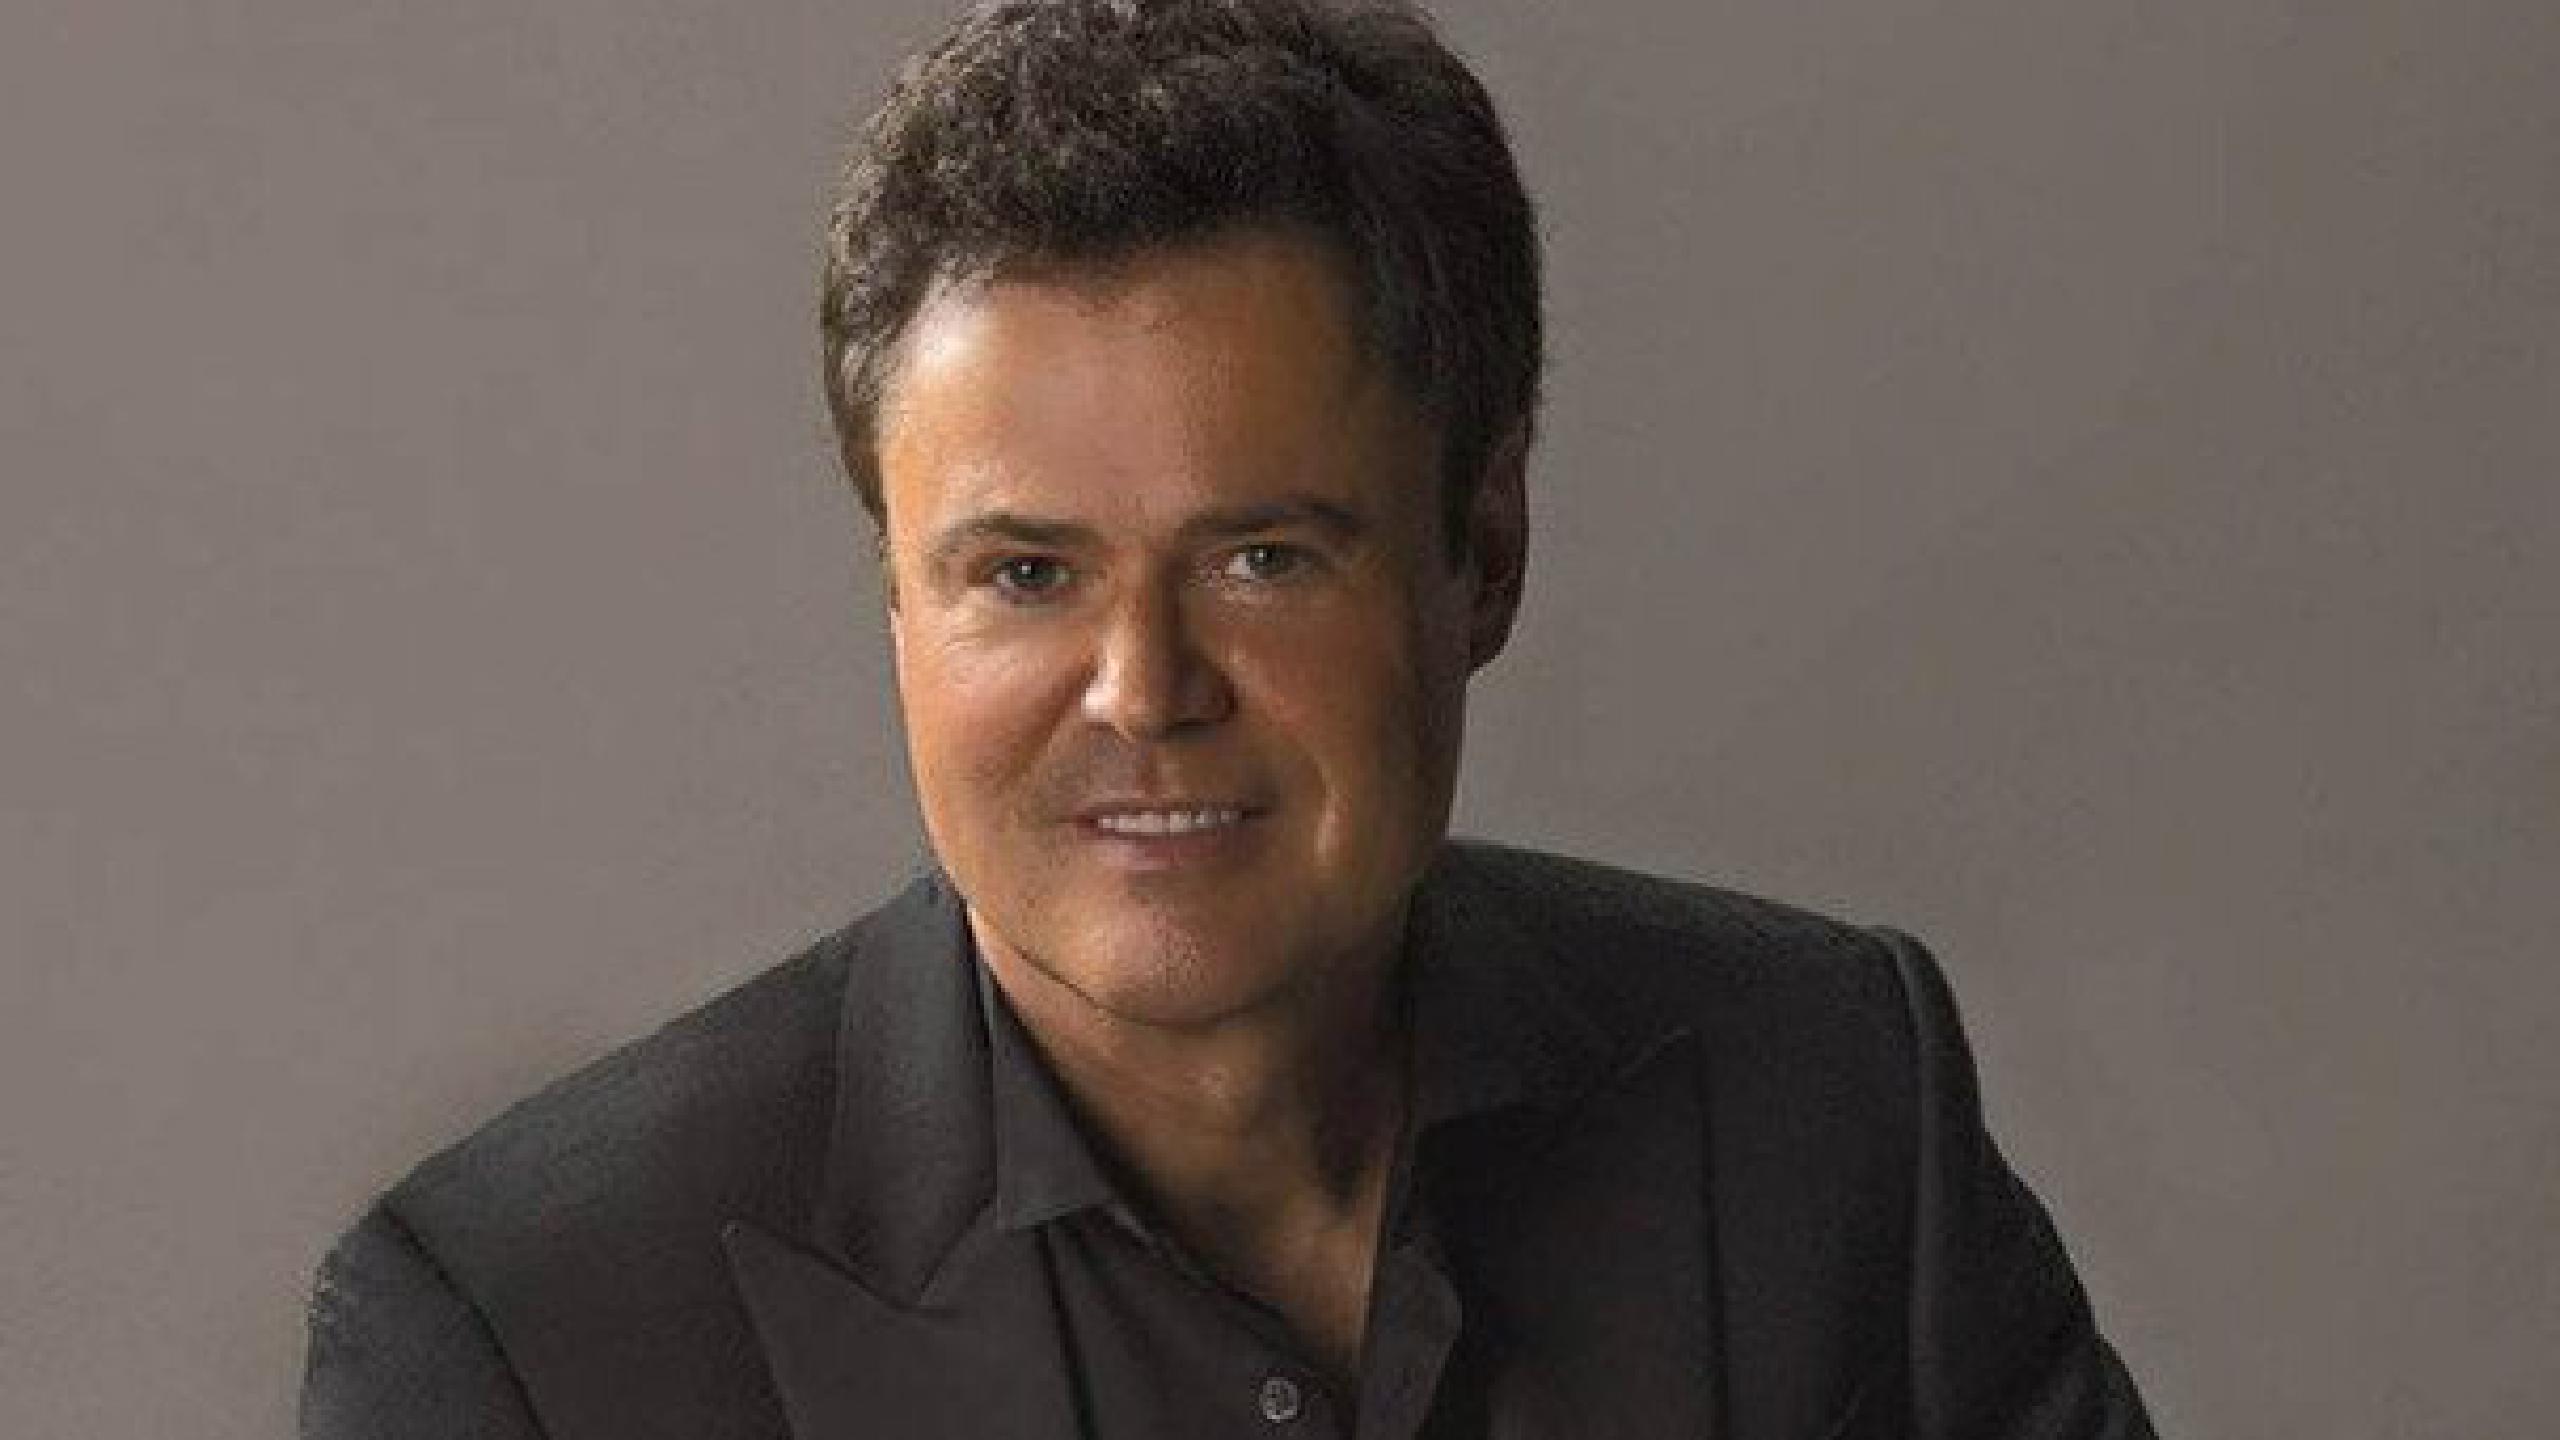 Donny Osmond tour dates 2022 2023. Donny Osmond tickets and concerts